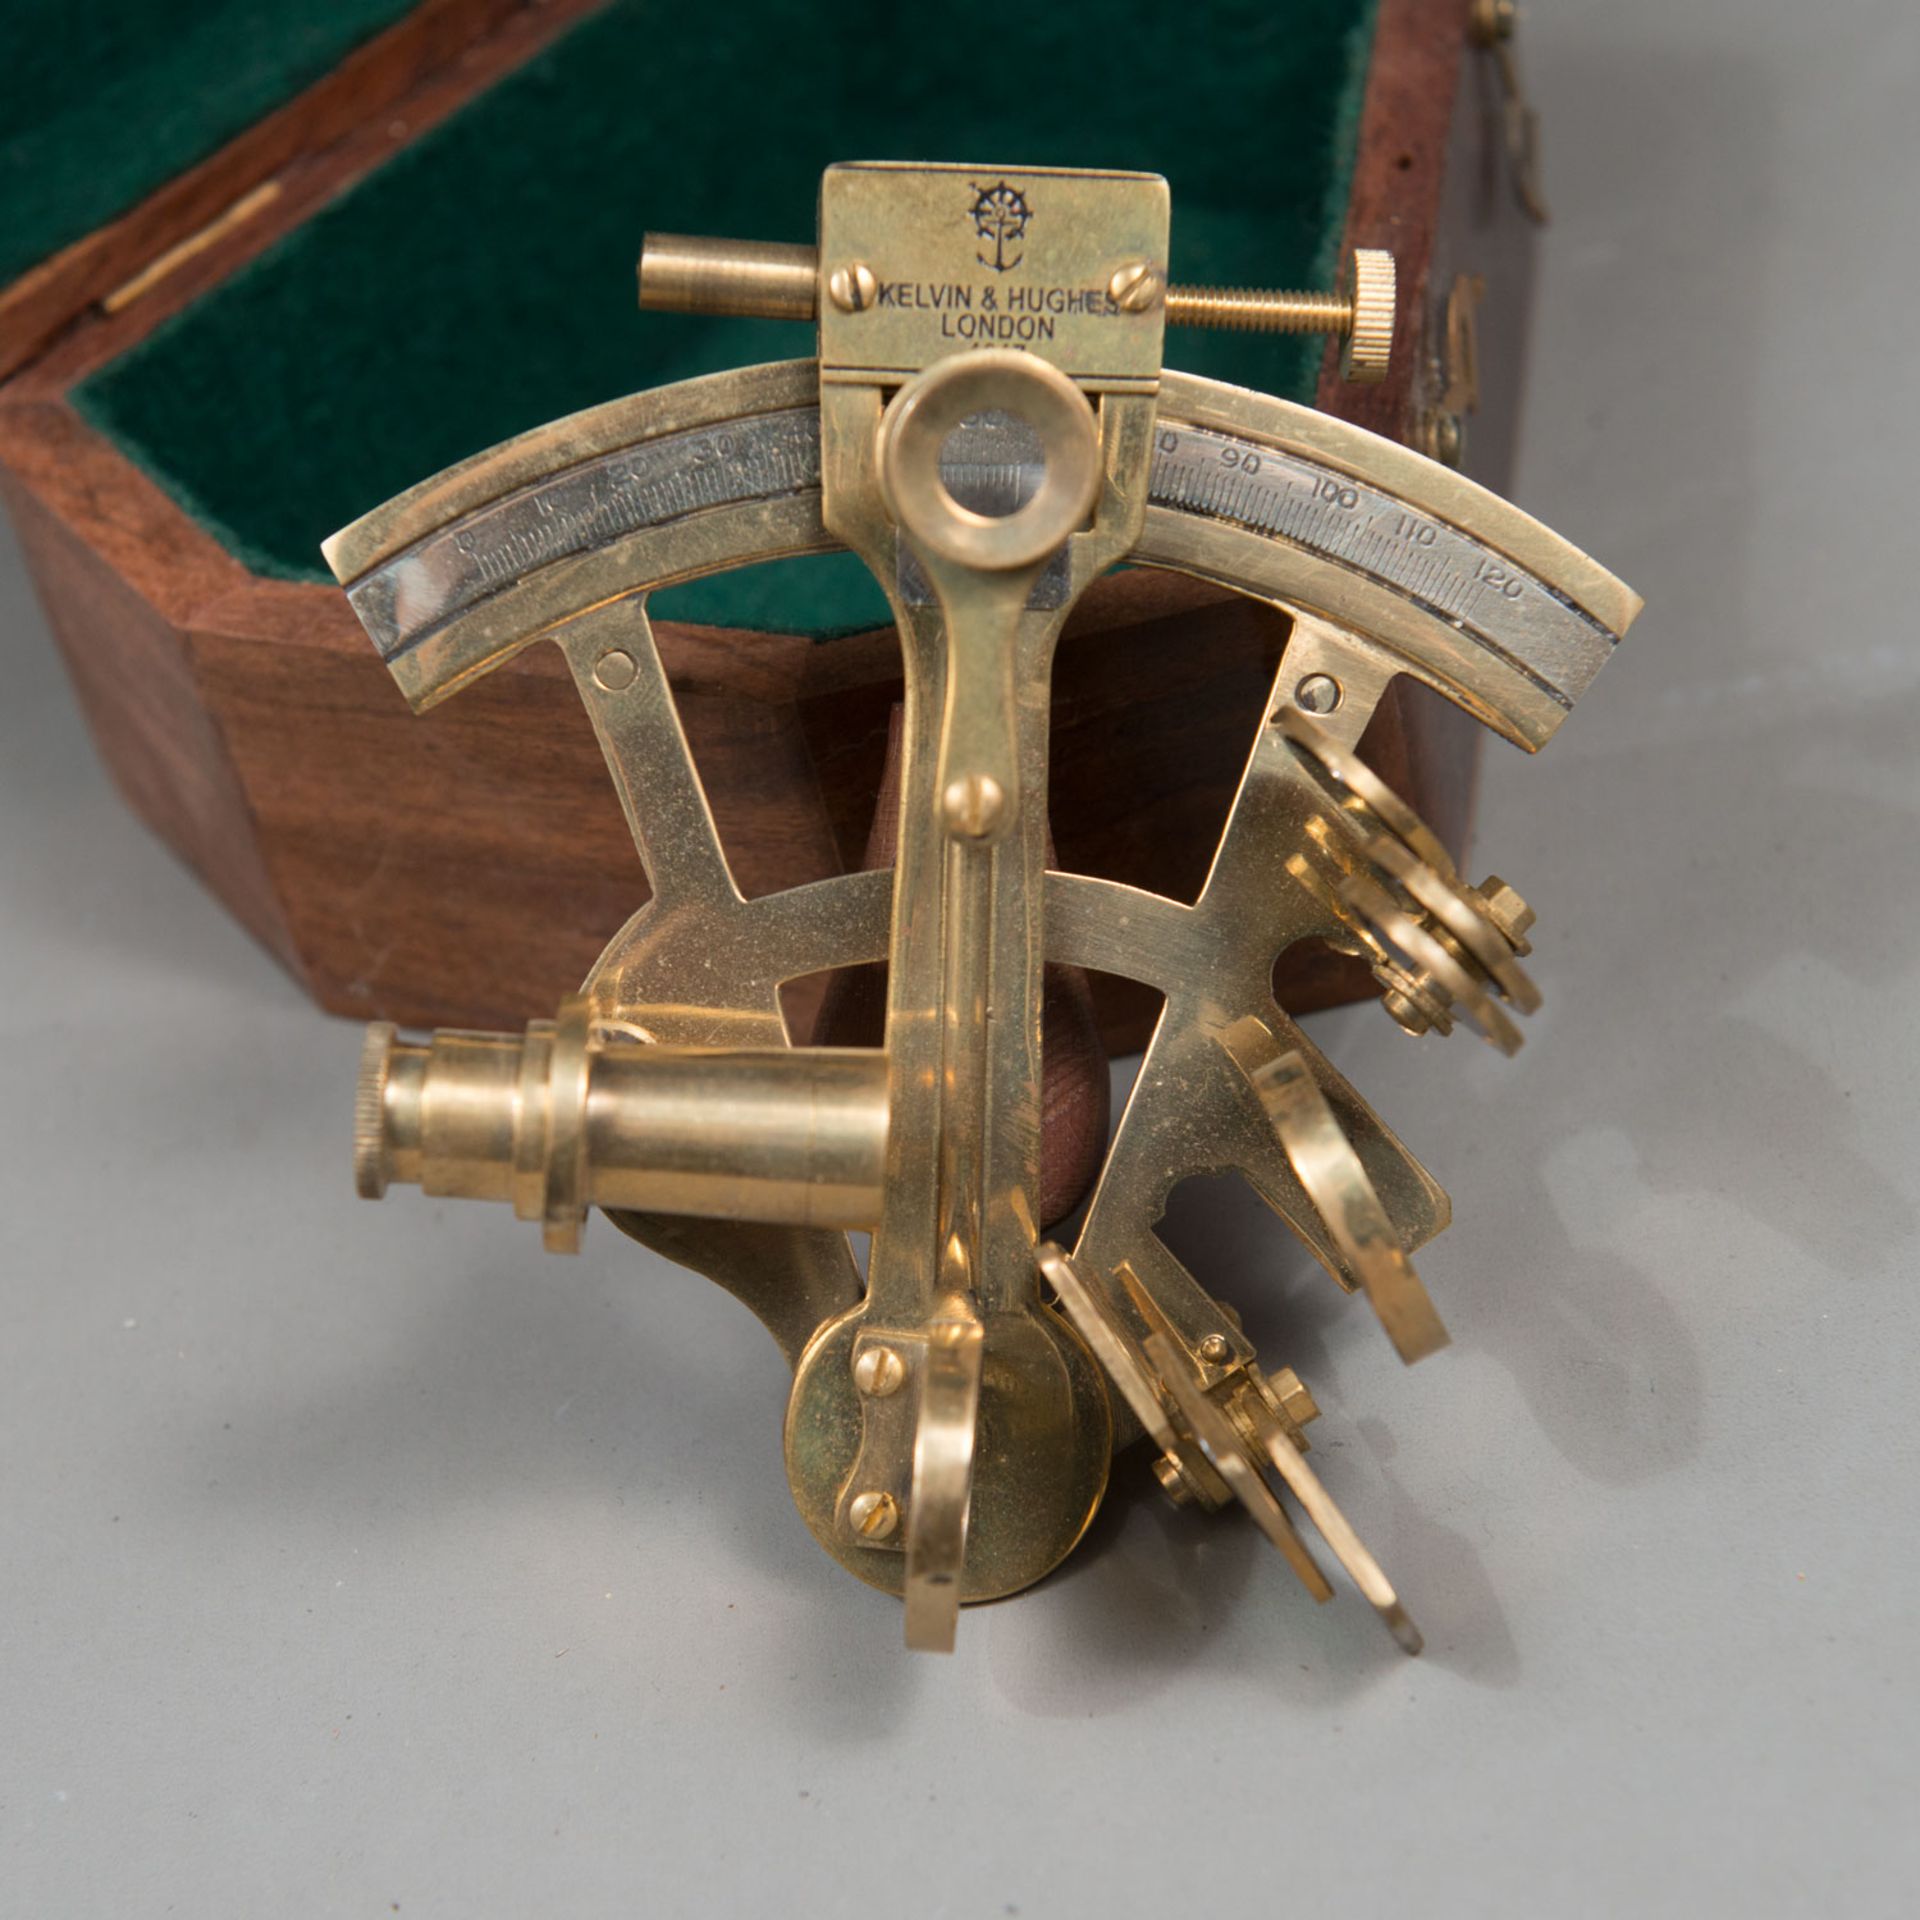 Kelvin and Hughes Sextant